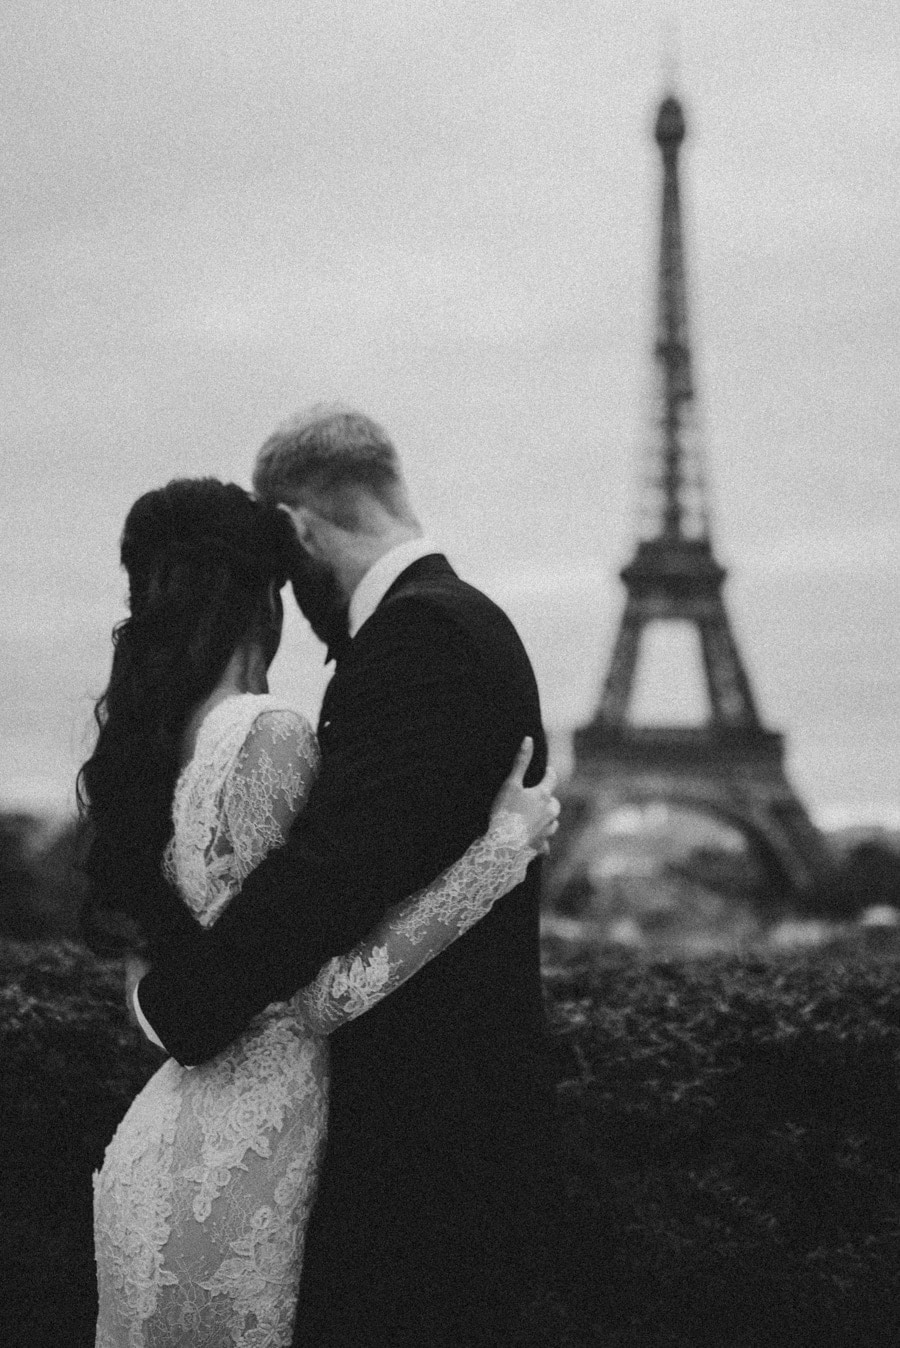 The Top 13 to Consider When Planning a Destination Wedding - What I Learned! (wedding in Paris, France)